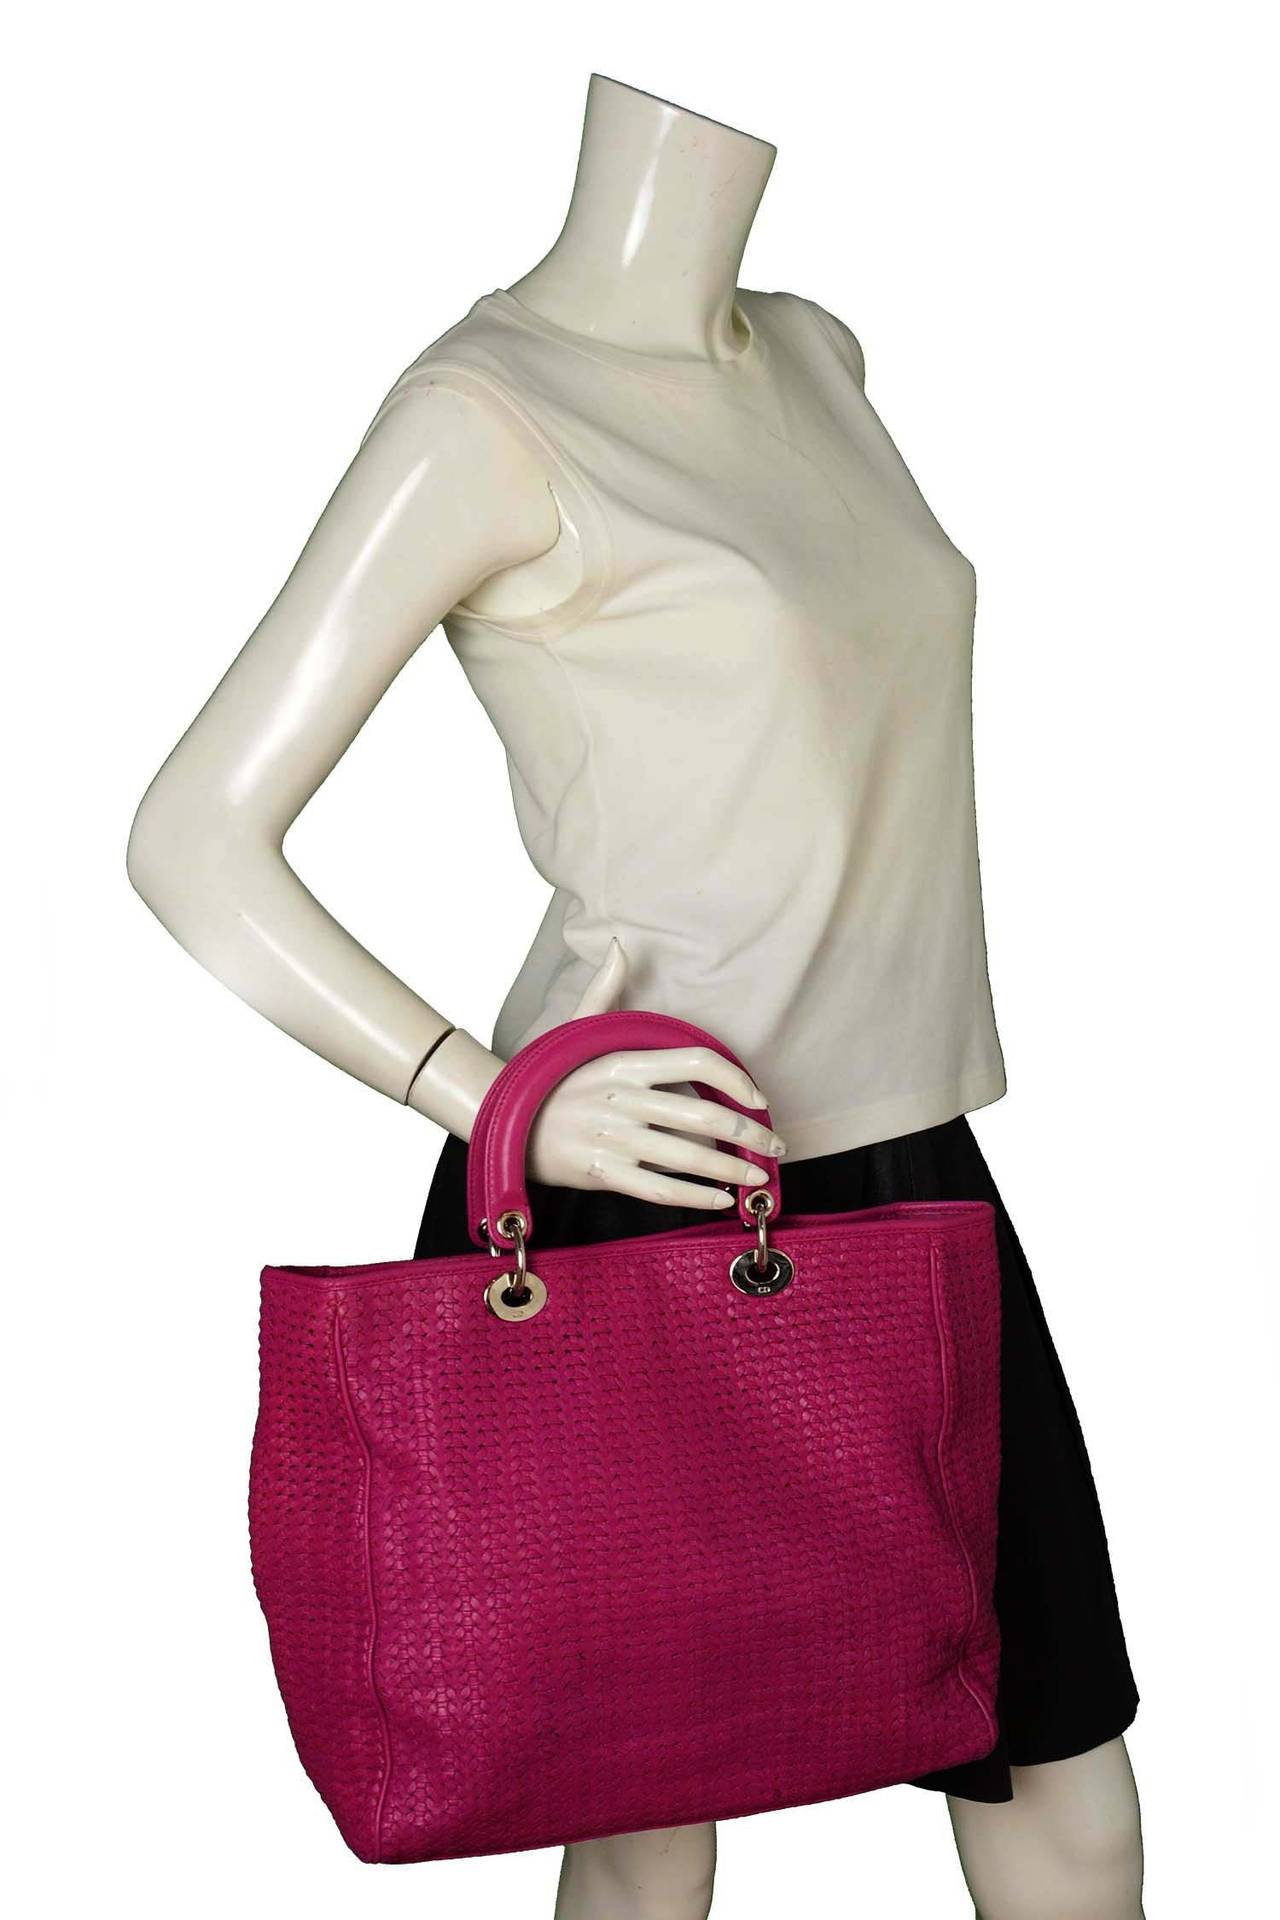 CHRISTIAN DIOR Dark Pink Woven Soft Leather Large Lady Dior Bag SHW rt.$2, 100 3